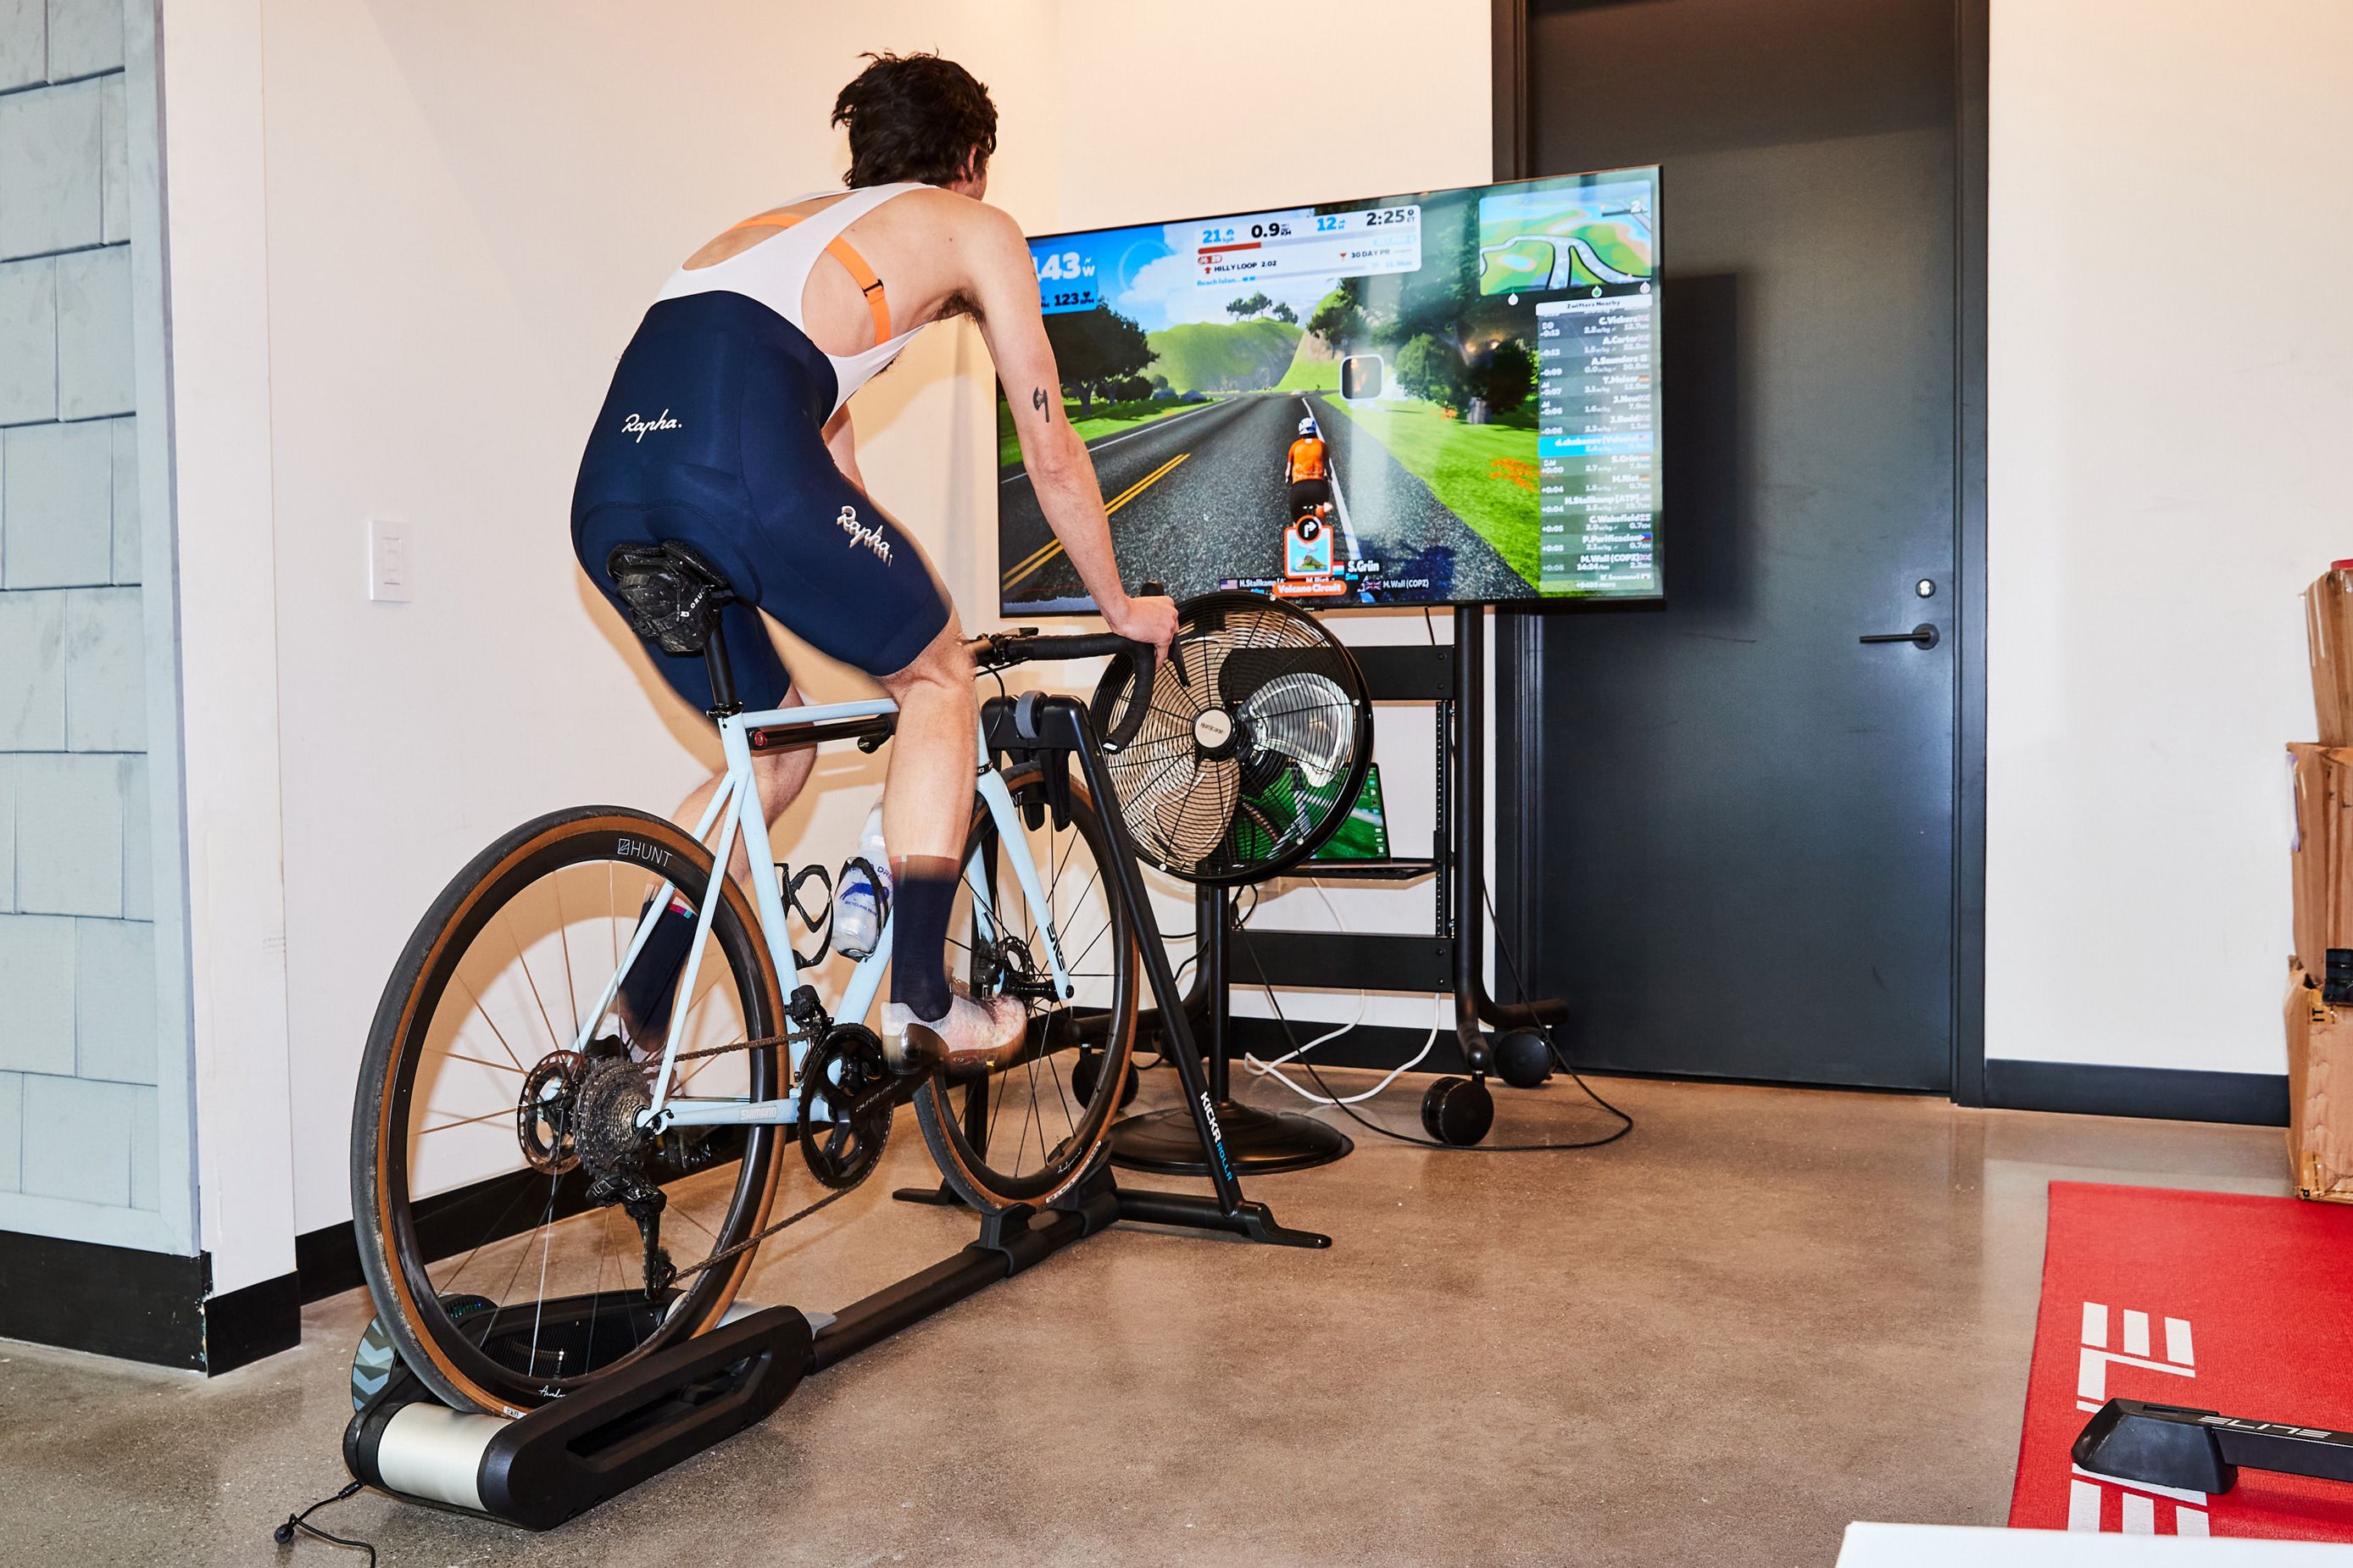 How to Get the Most Out of Zwift, According to Cycling Pros